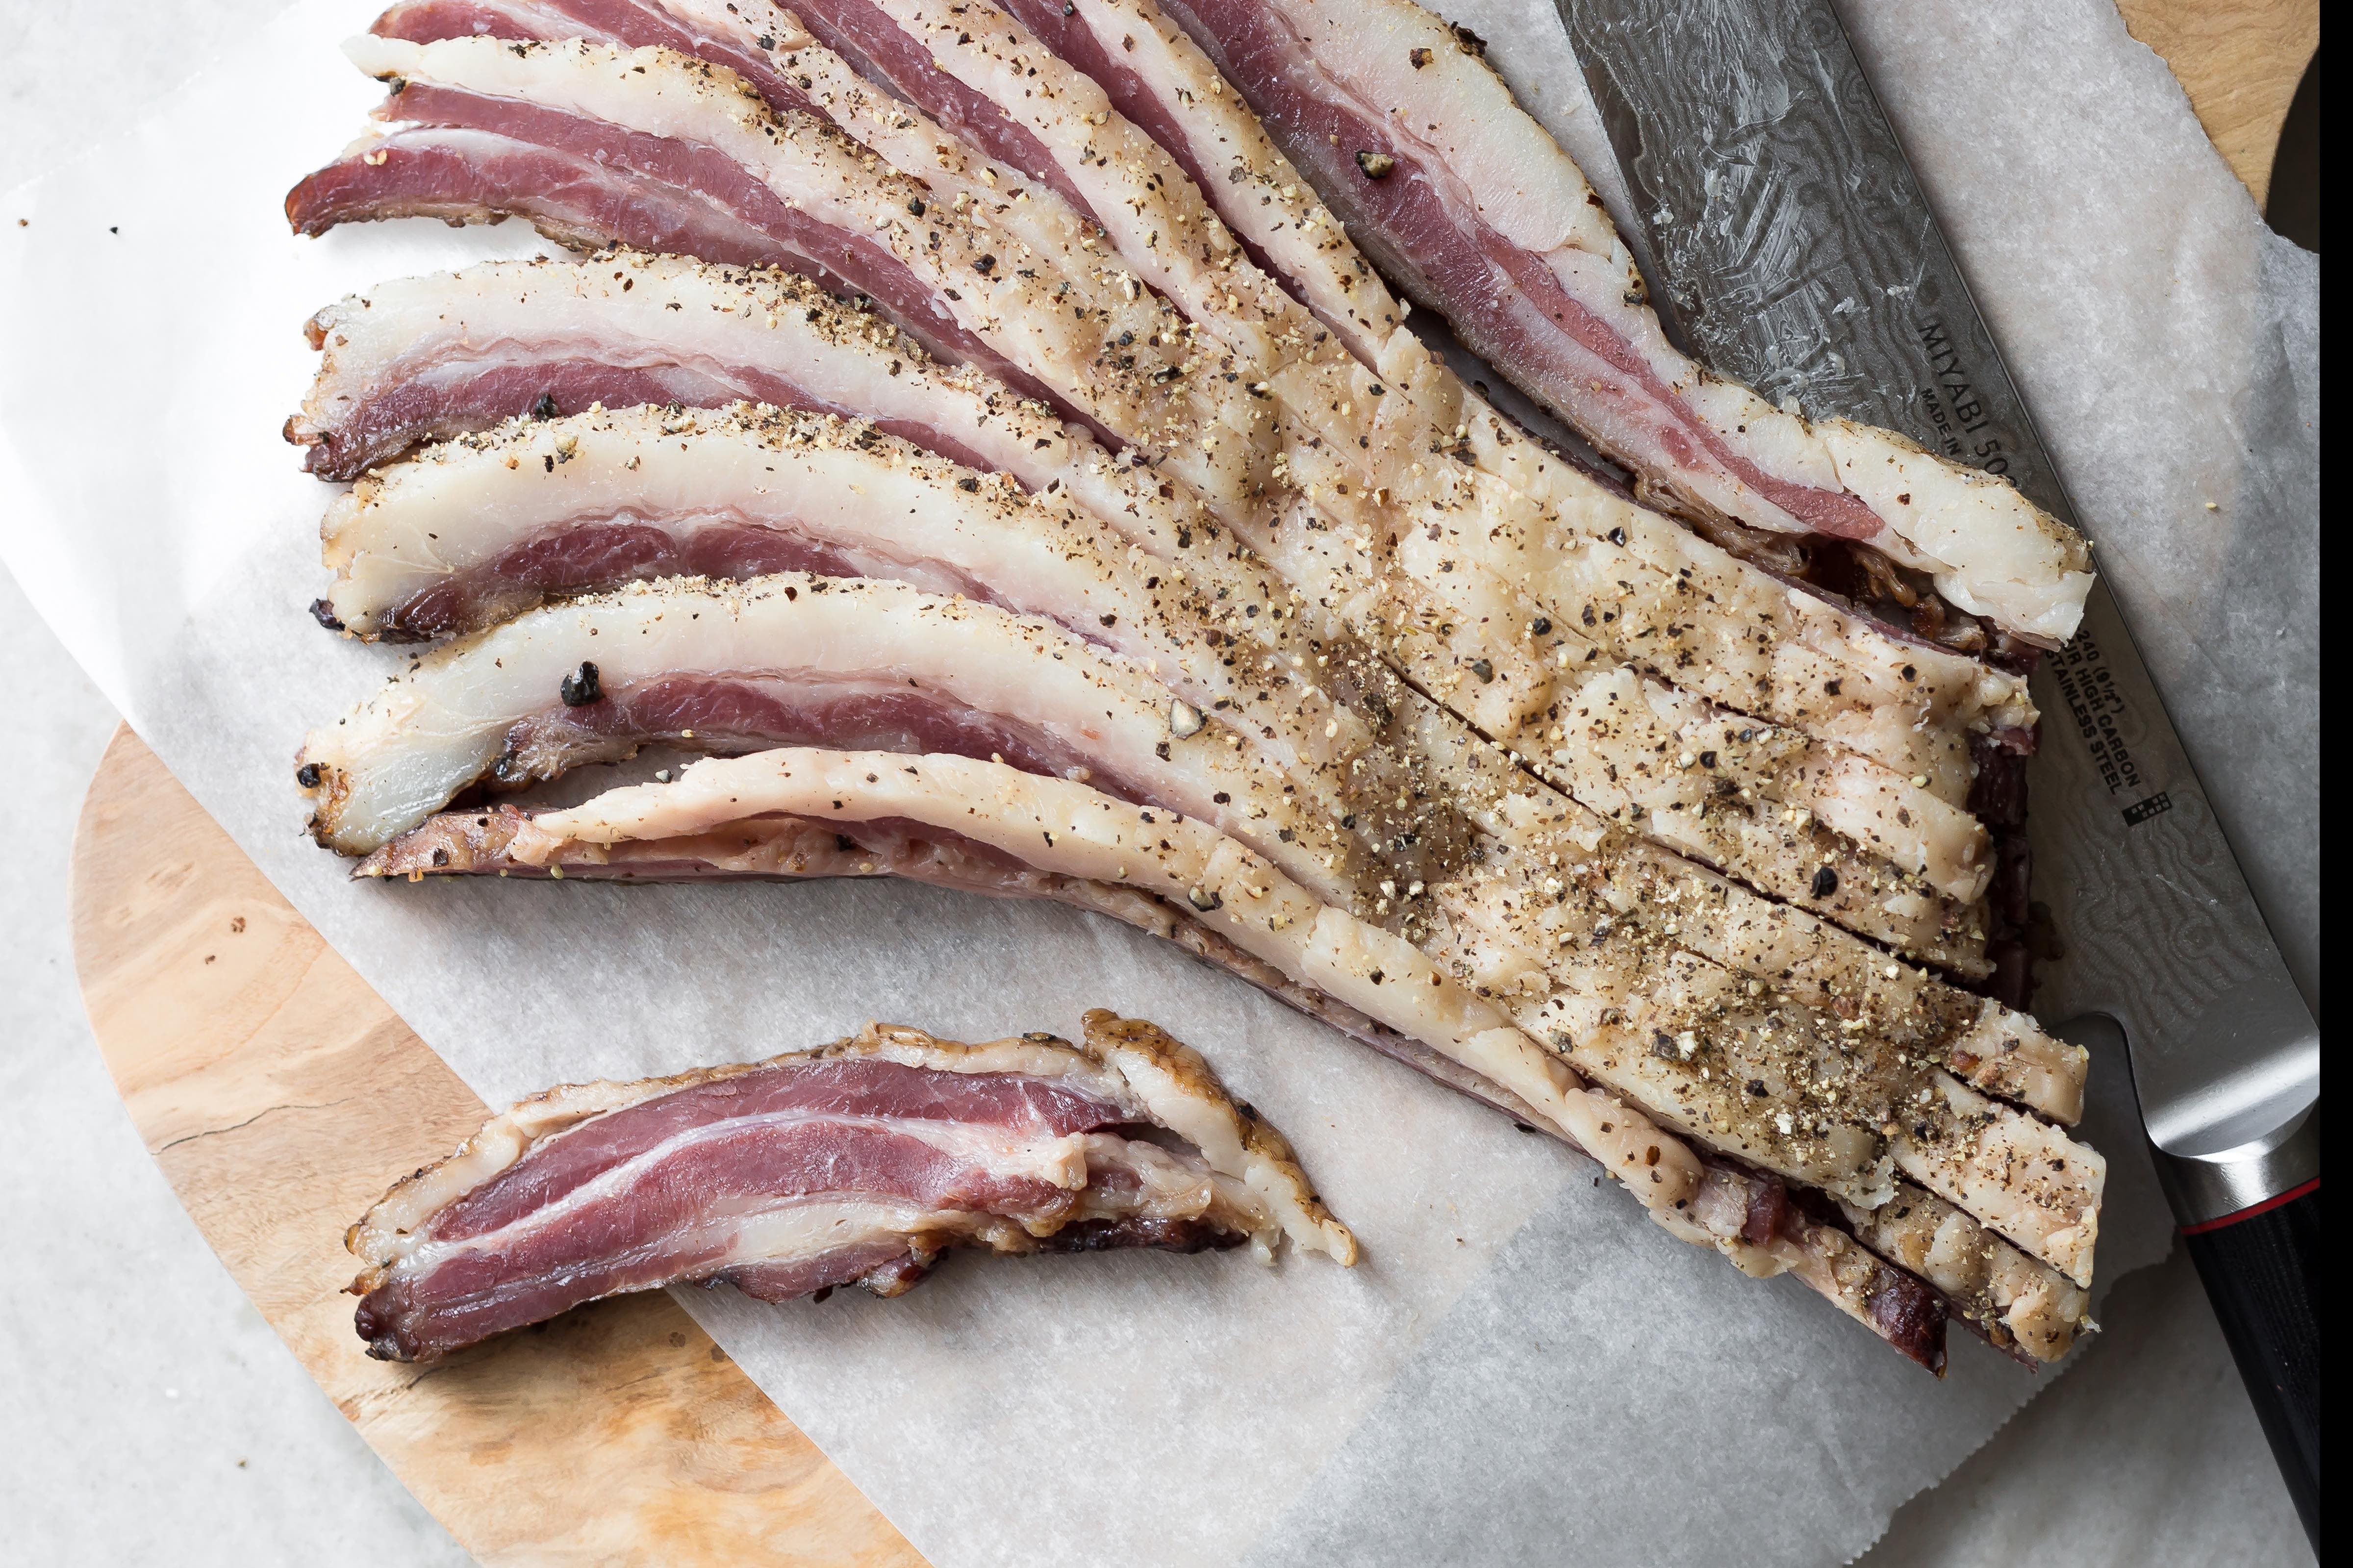 Why Wild Boar Bacon Is the Hero of My Fridge Right Now